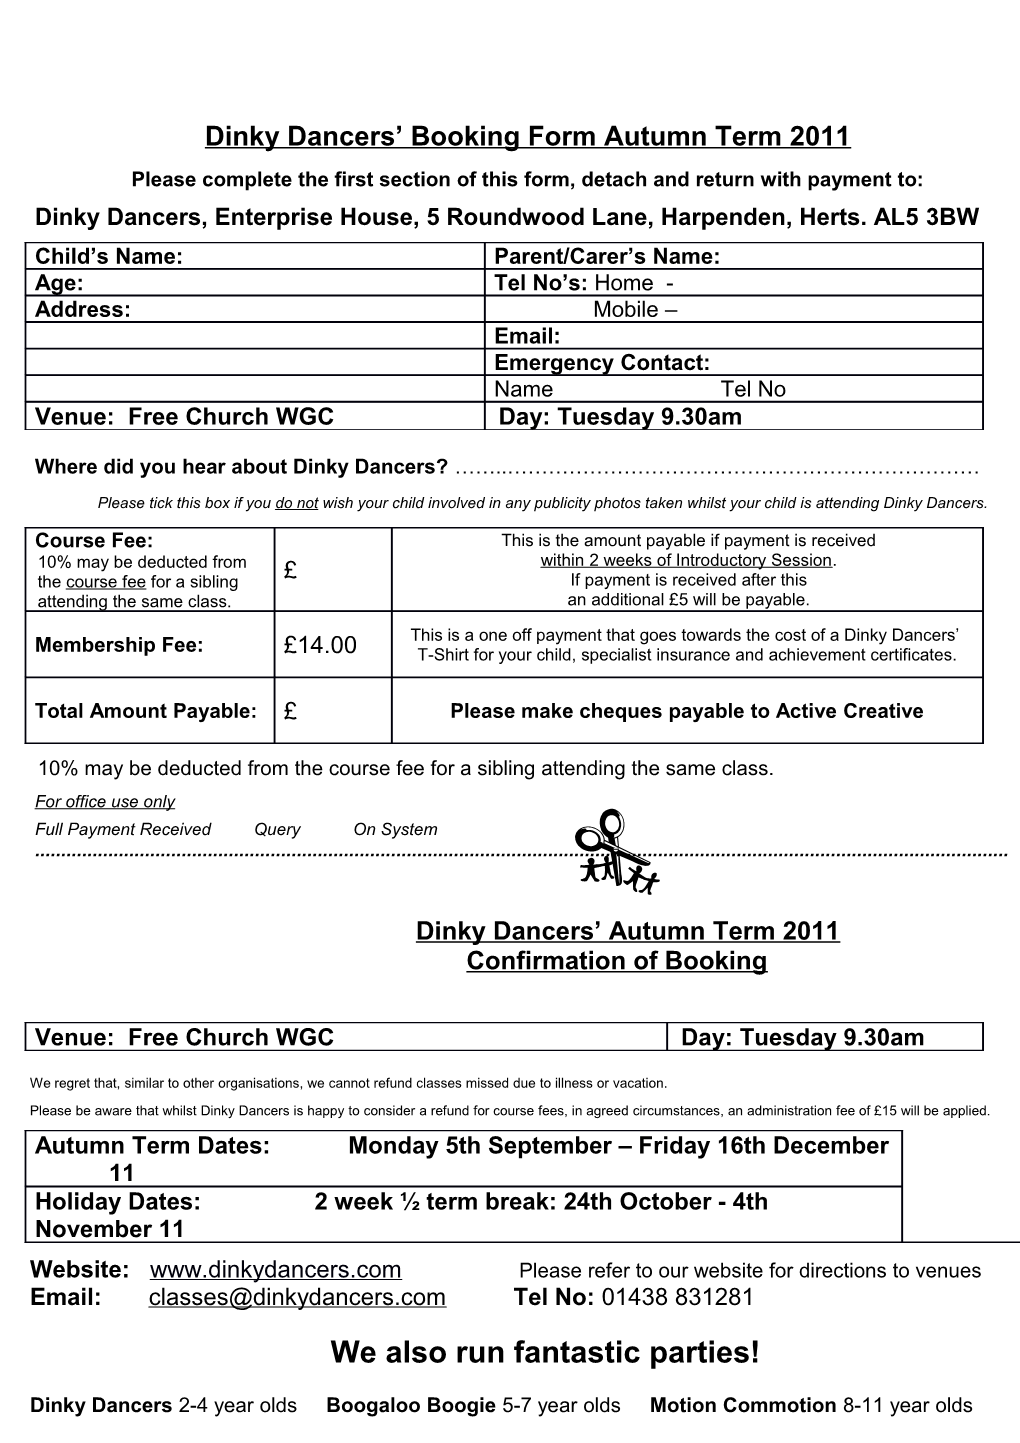 Dinky Dancers Booking Form Autumn Term 2011